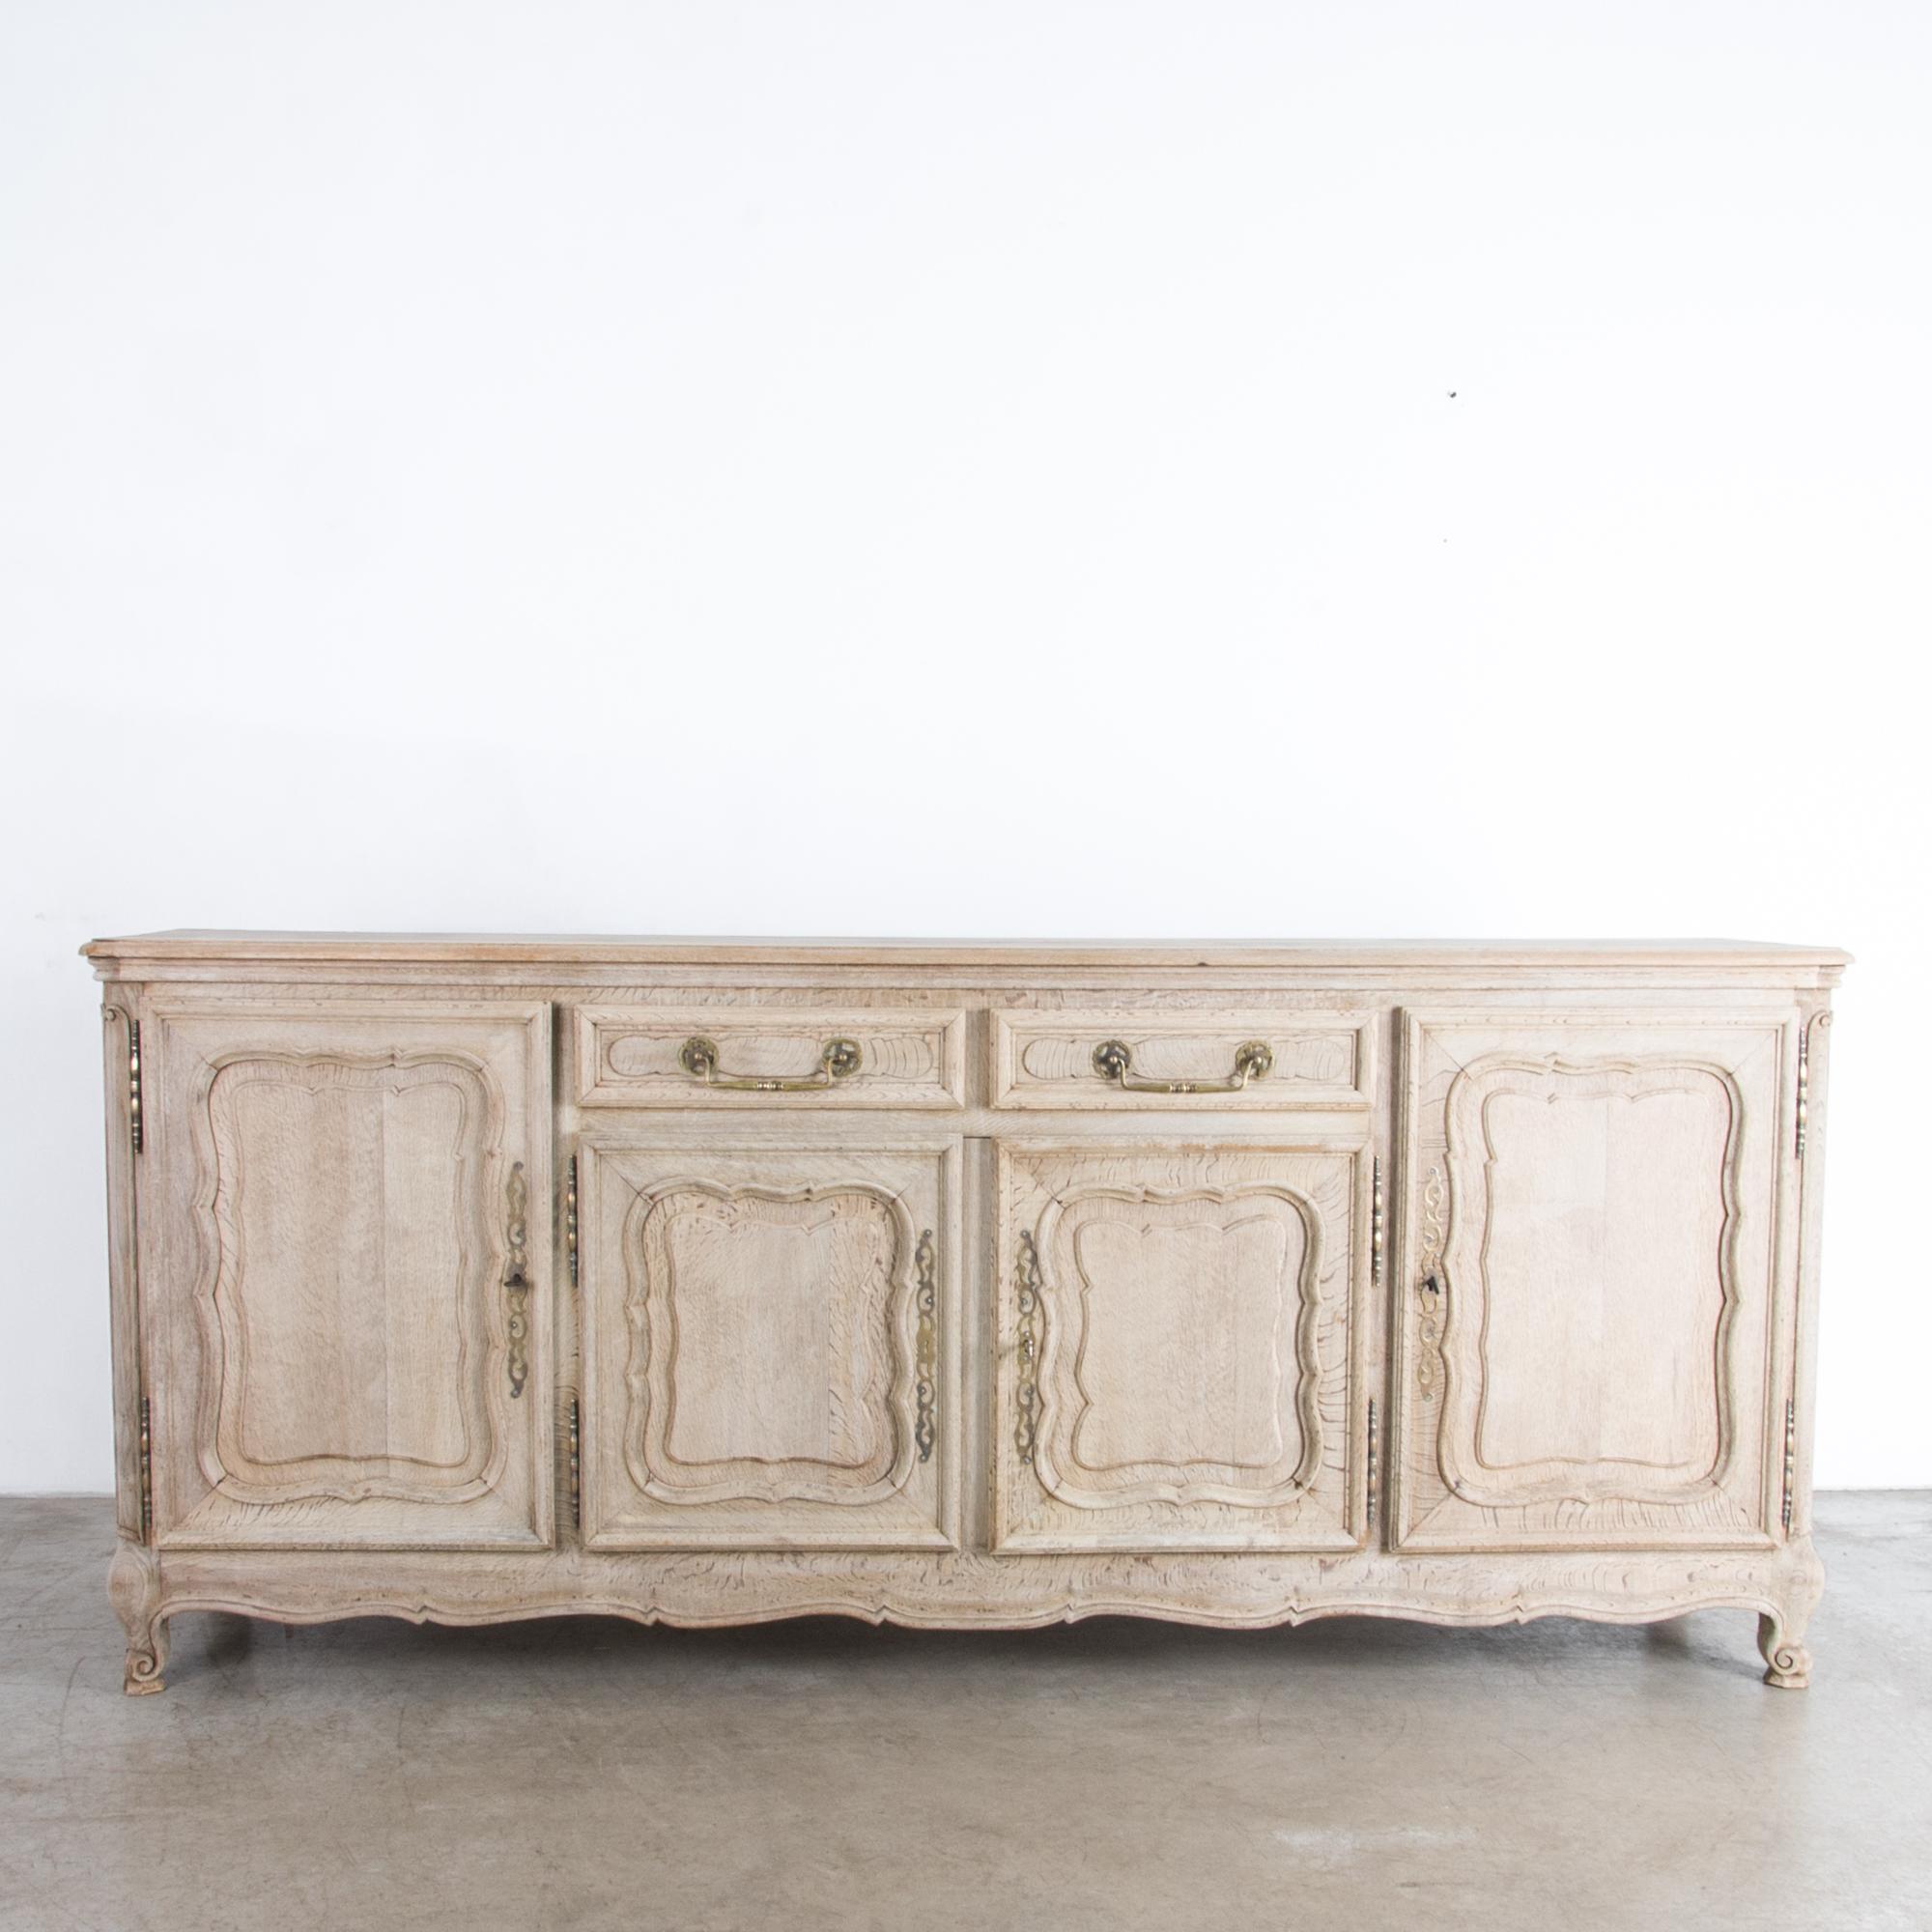 A four-door buffet cabinet from Belgium, circa 1950. This piece follows the techniques and style of traditional Provincial furniture makers, adapted for the 20th century, and refreshed in our atelier with a bright natural finish. Textured oak is